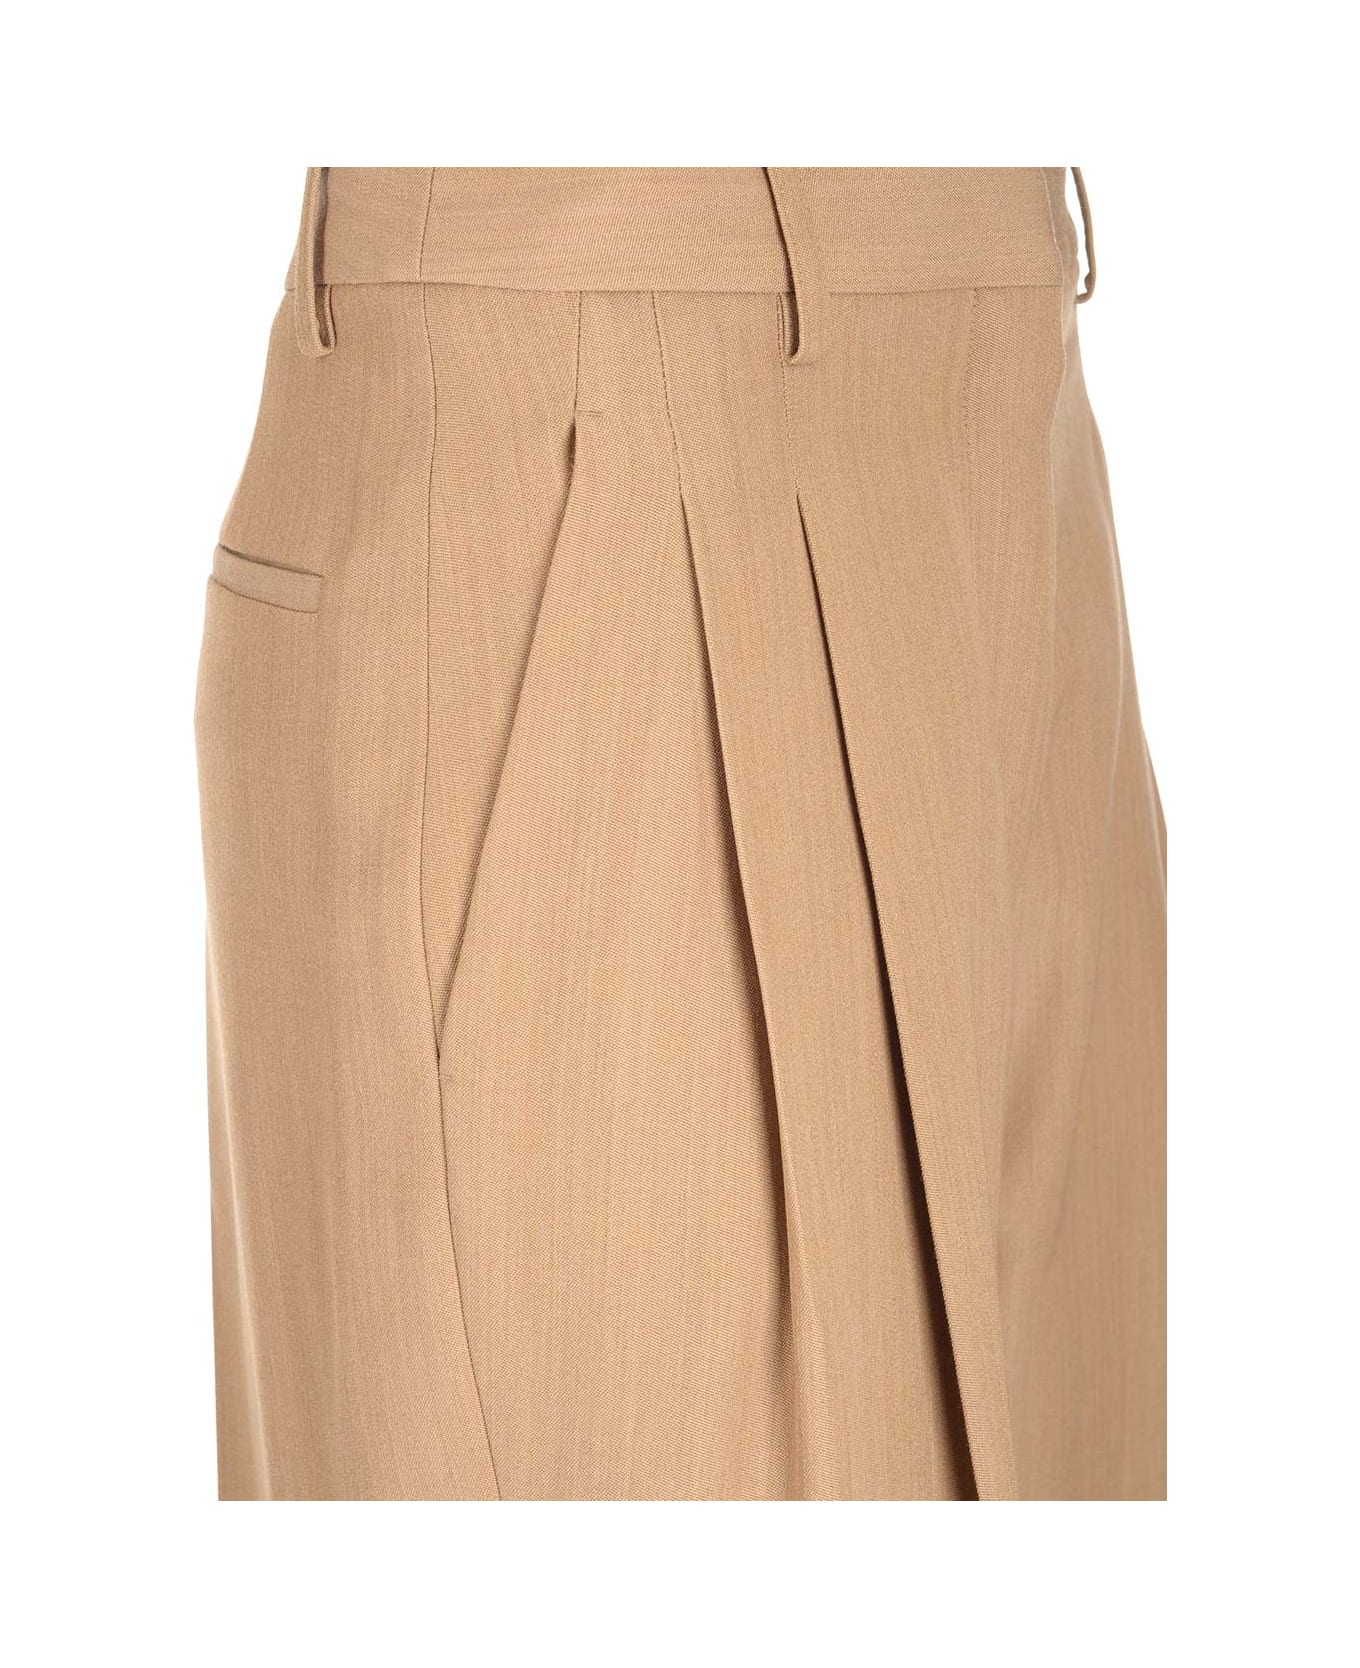 Burberry 'madge' Wide-leg Trousers - Beige ボトムス